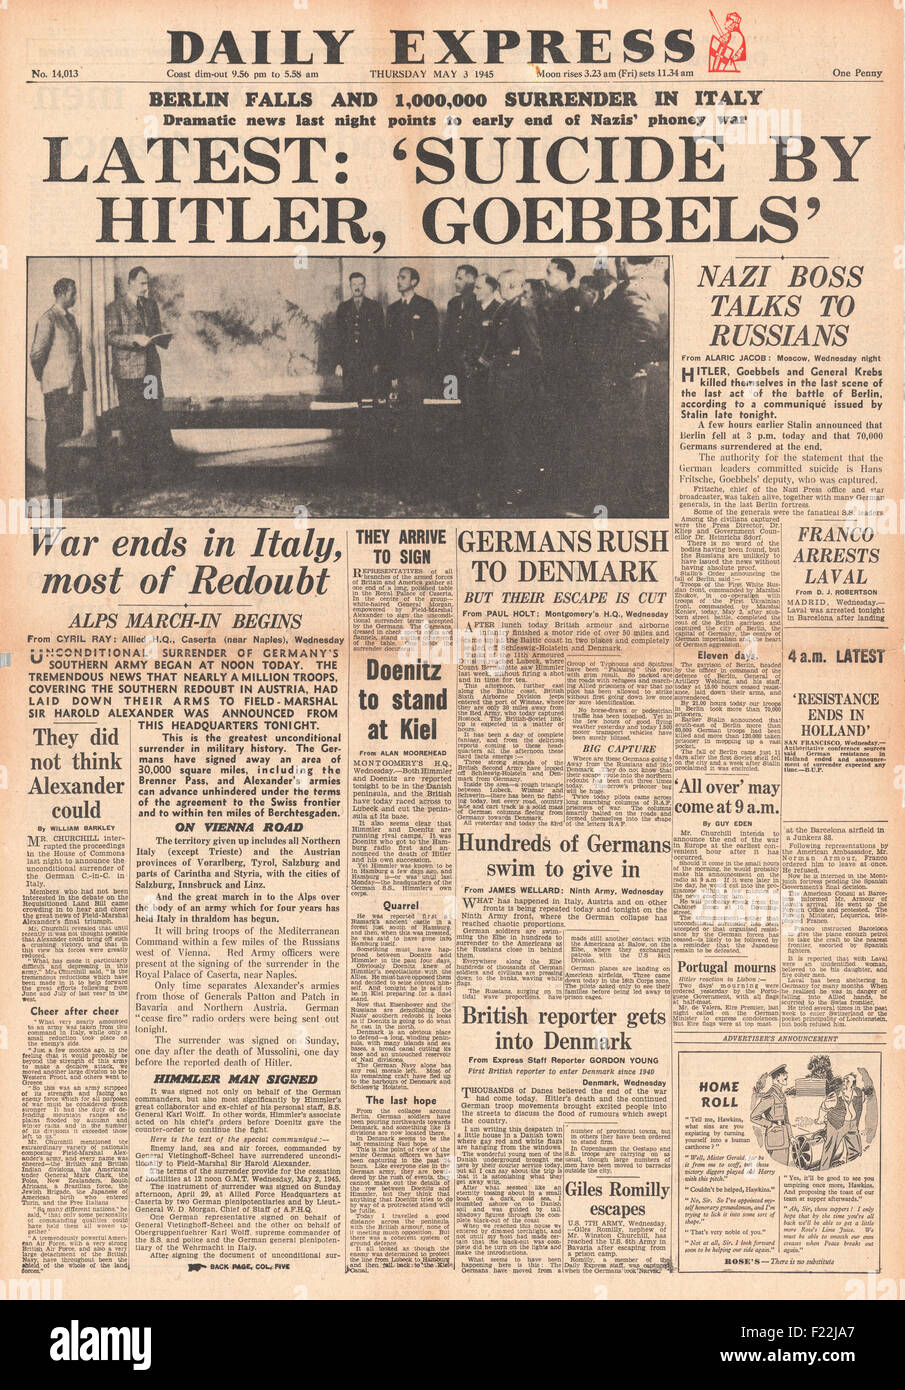 1945 Daily Express front page reporting Confirmation of Hitler and Goebbels Suicide Stock Photo